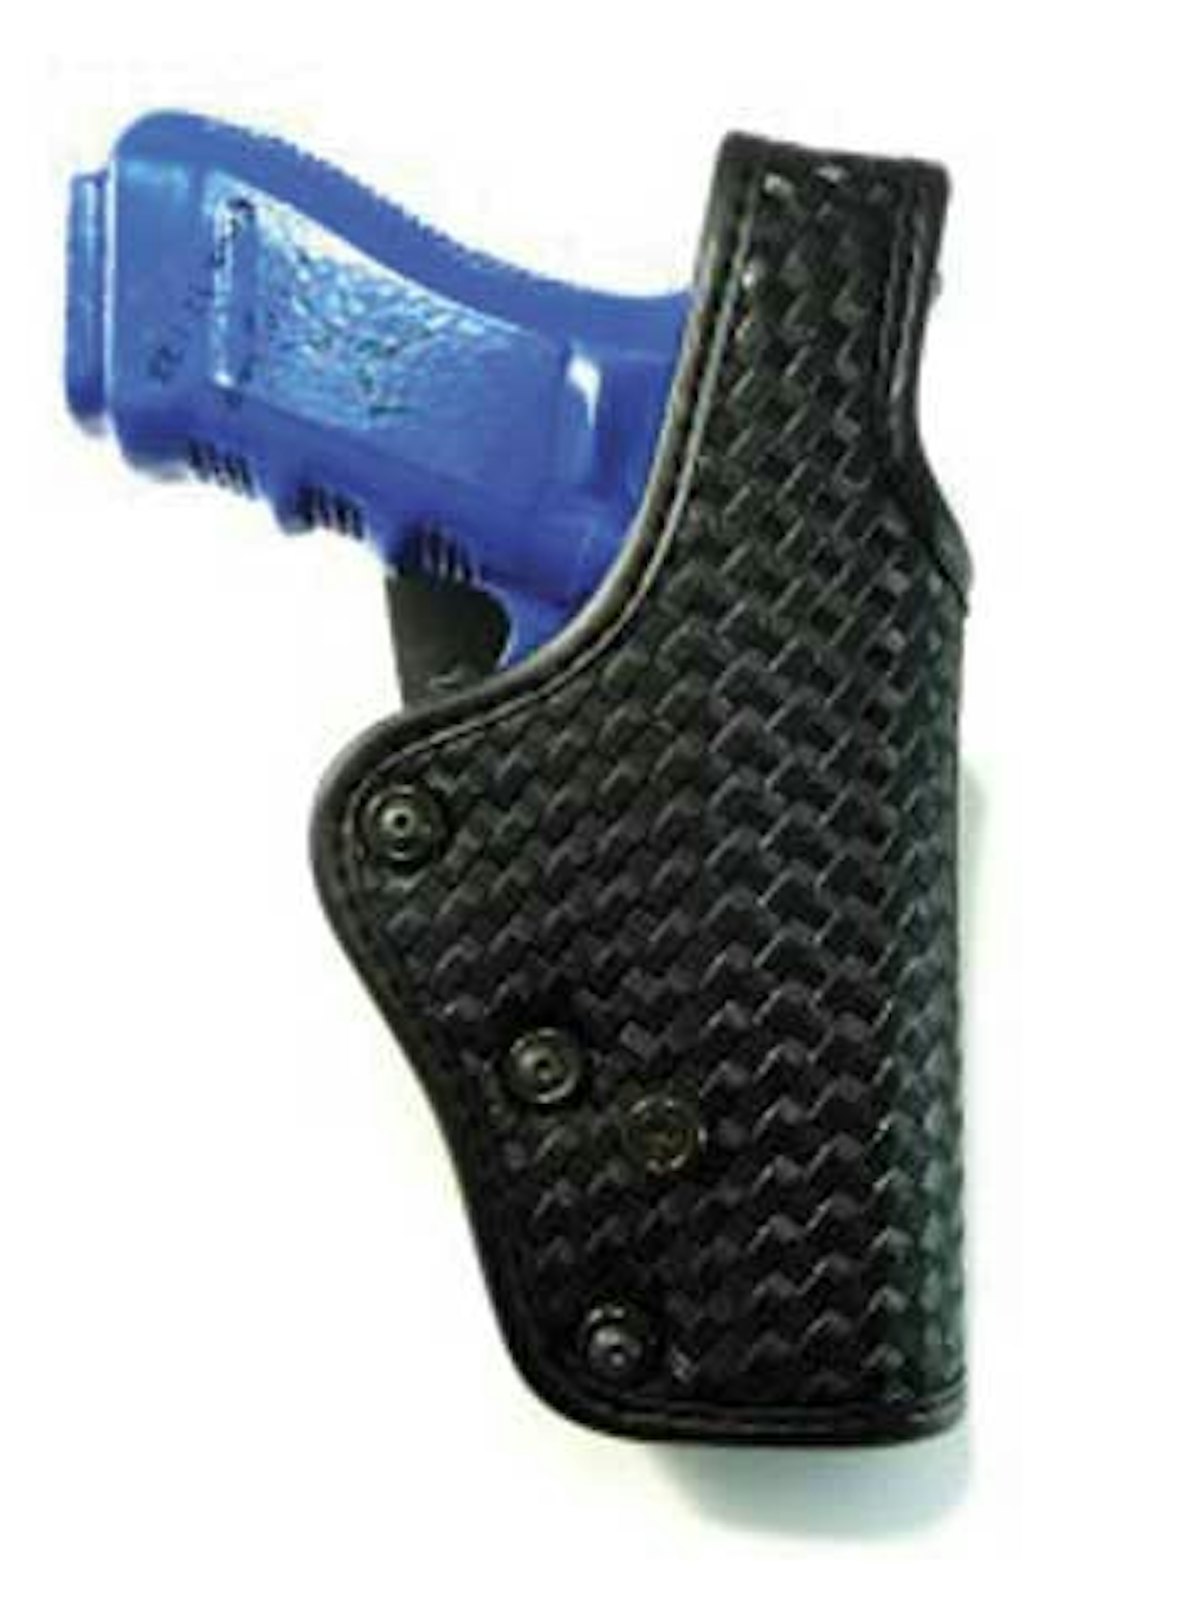 Saddle Mate Leather Gun Holster with Adjustable Retention Strap - 9 in